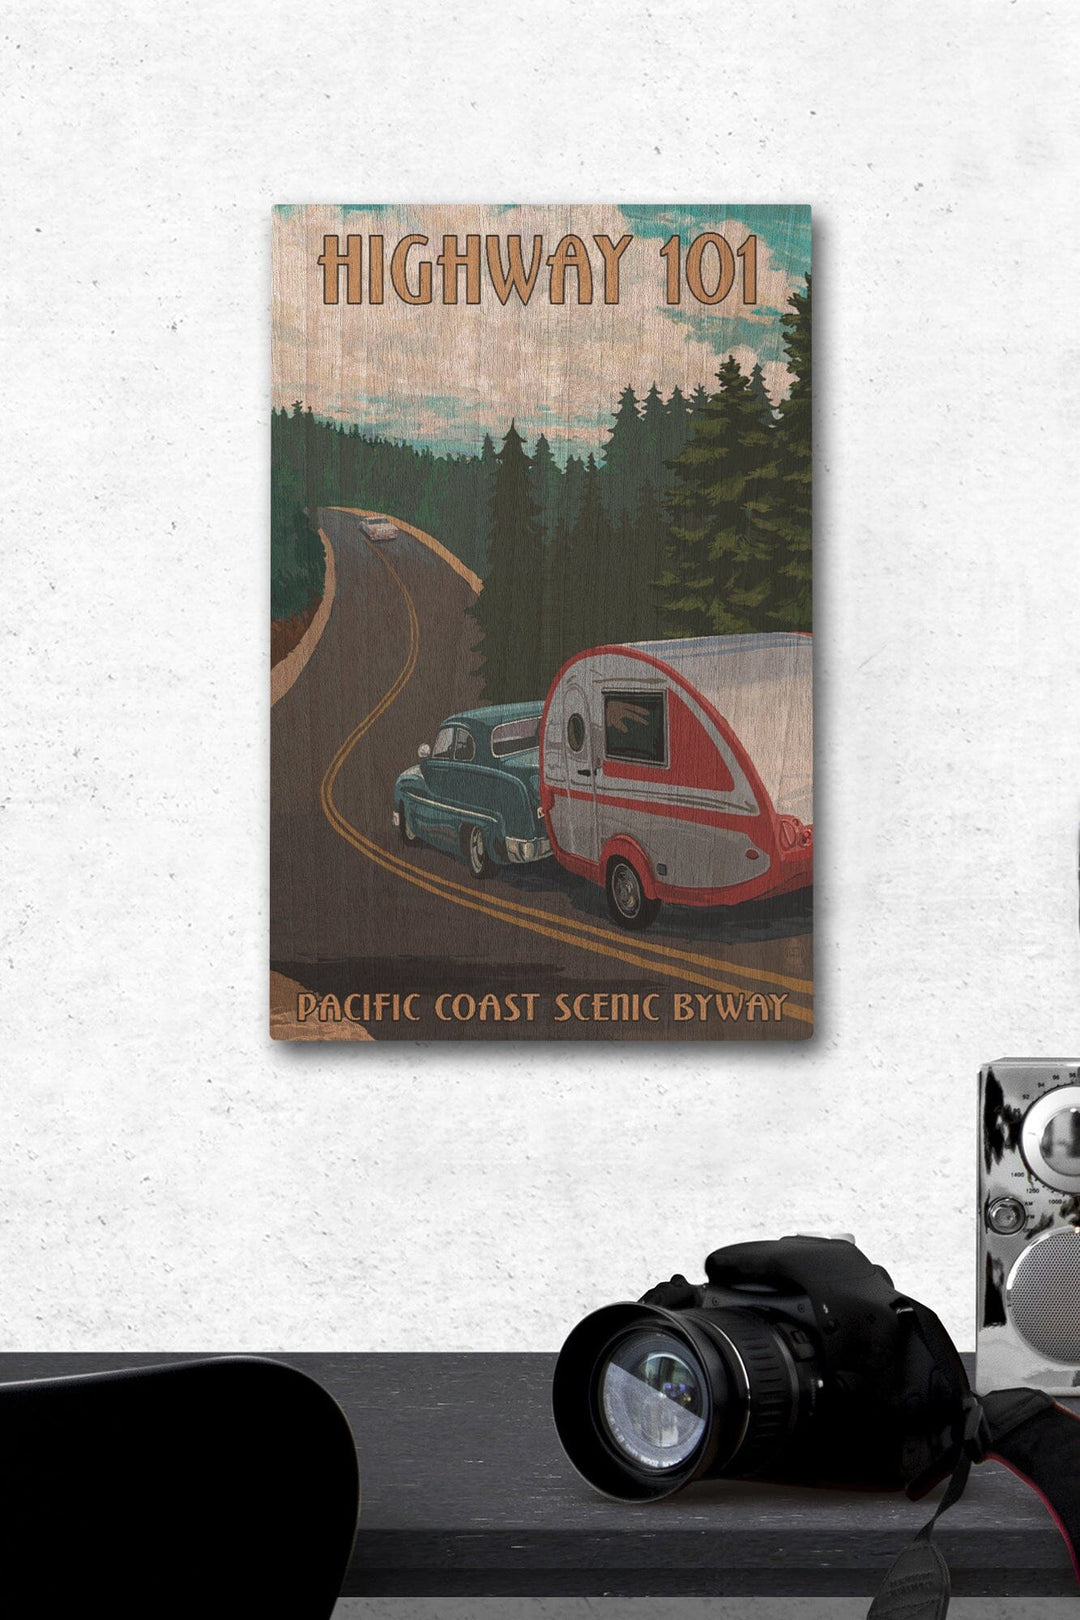 Highway 101, Pacific Coast Scenic Byway, Retro Camper, Lantern Press Artwork, Wood Signs and Postcards Wood Lantern Press 12 x 18 Wood Gallery Print 